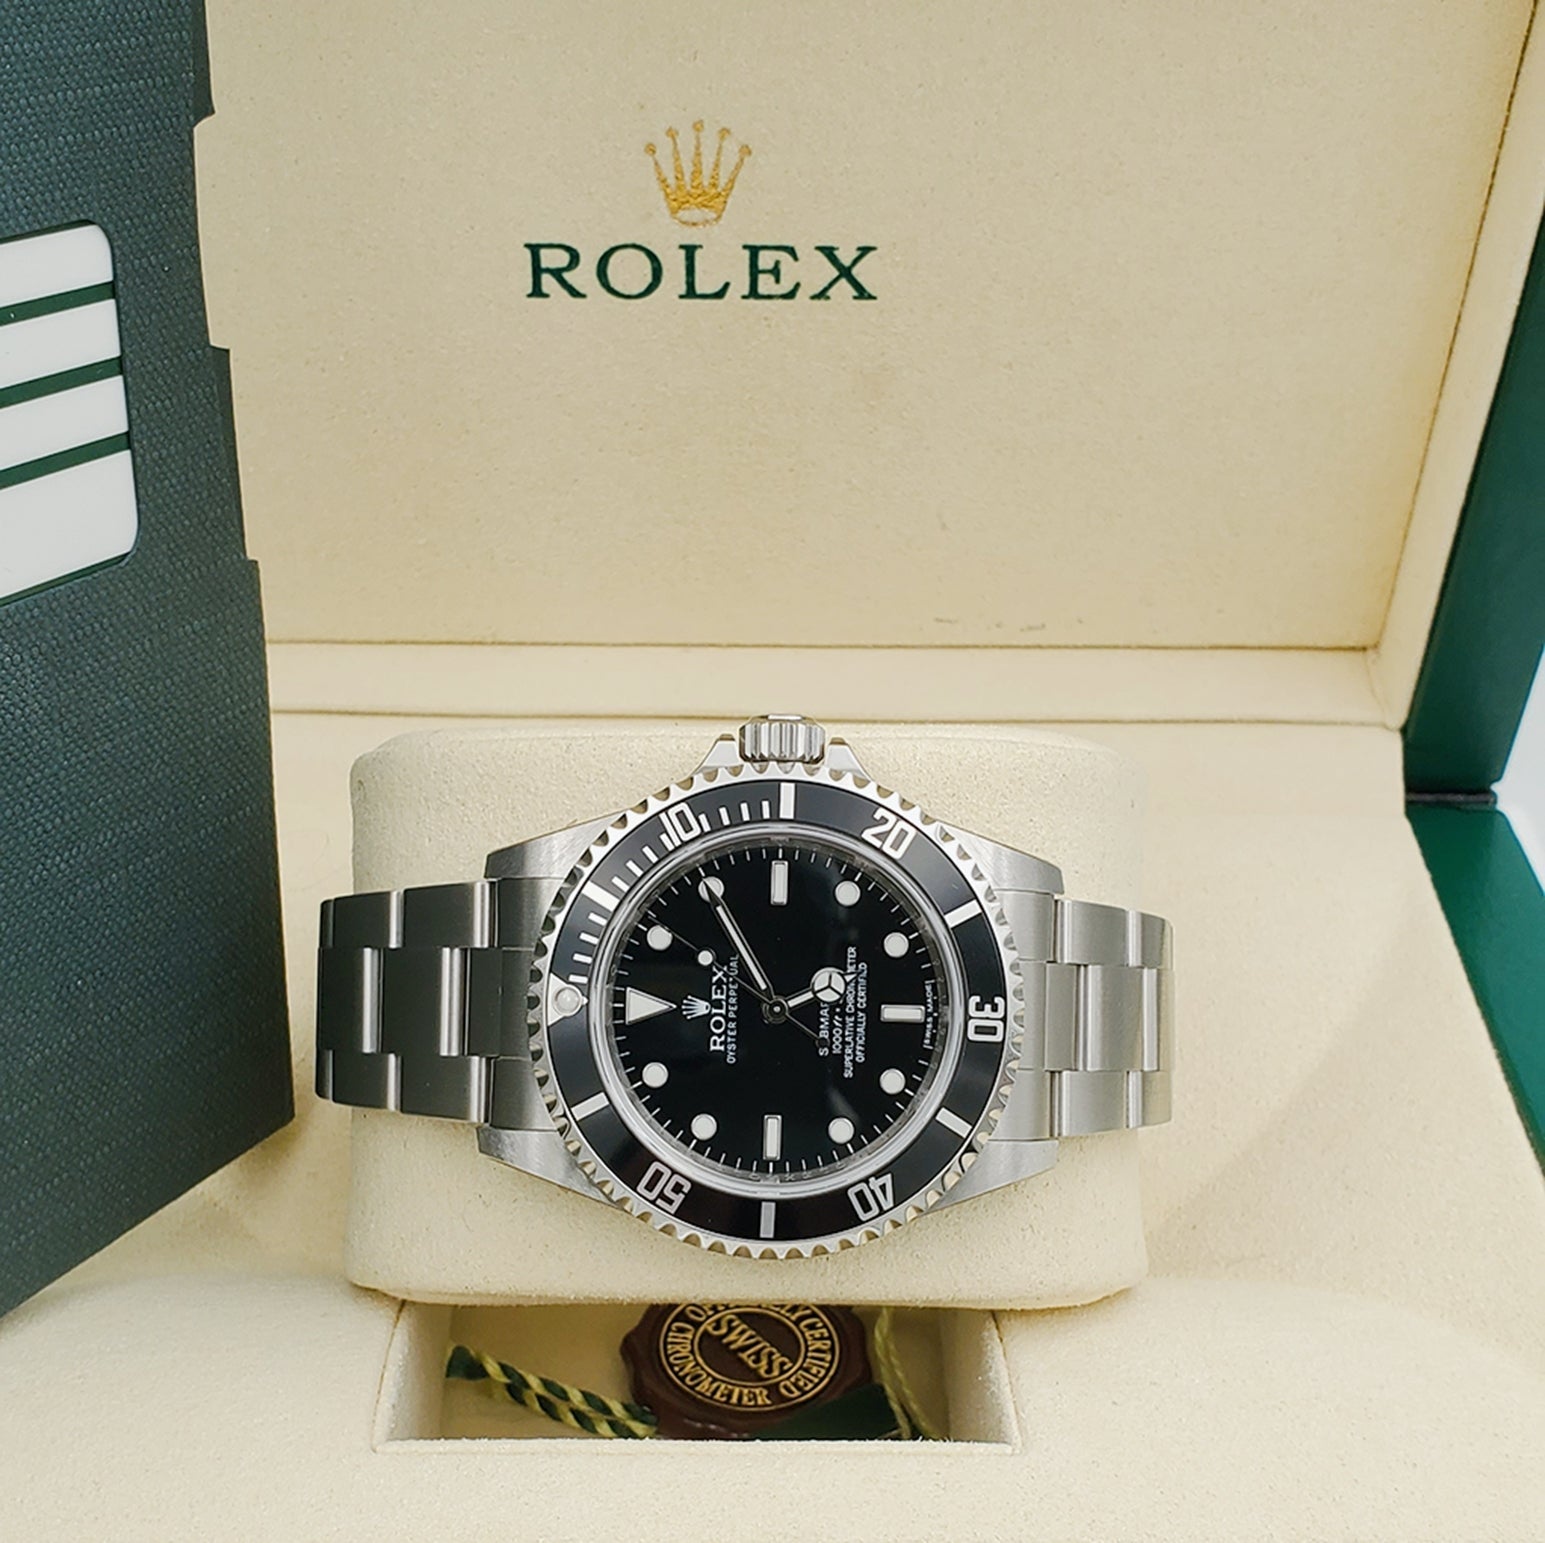 Rolex Submariner 16610 Date - 40mm Mens Watch - Black Dial - Box & Papers - 2008